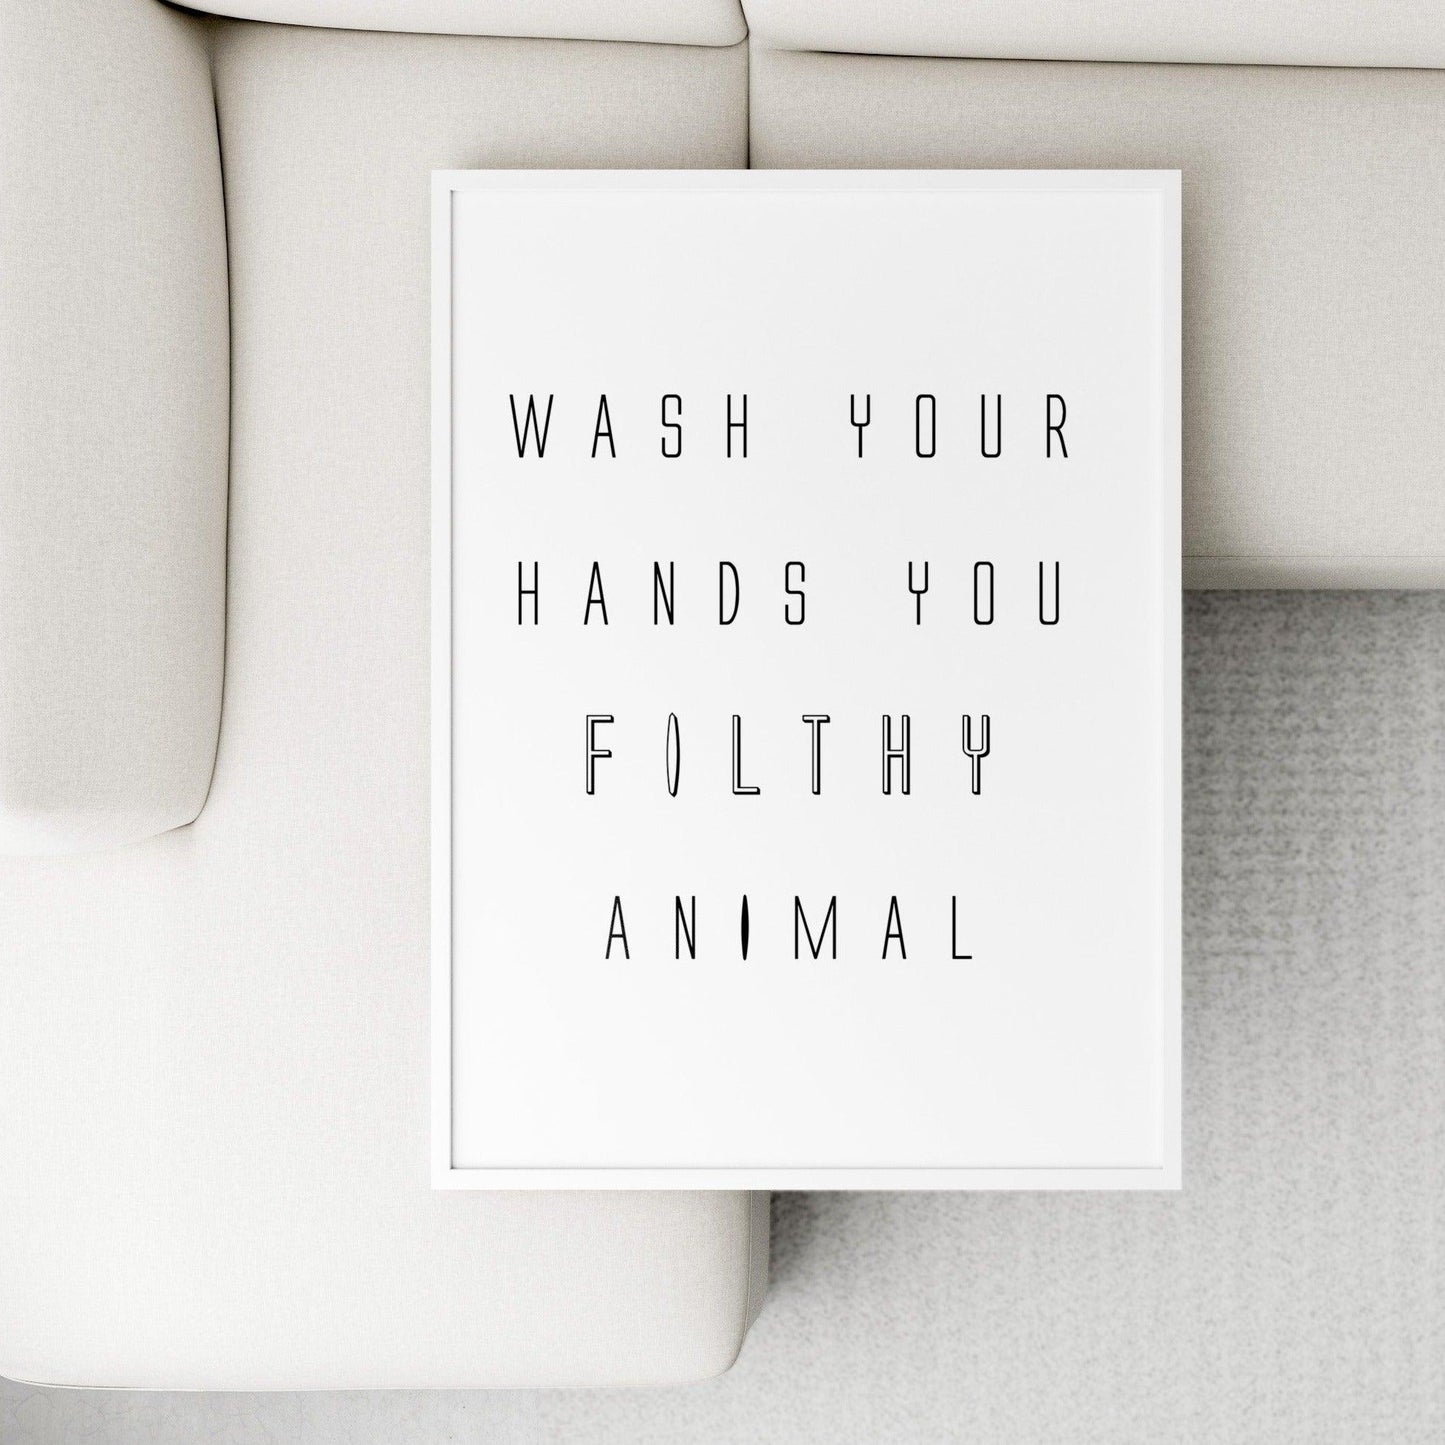 Wash Your Hands Ya Filthy Animal | Bathroom Print Home | Funny Typography | Wall Art Poster